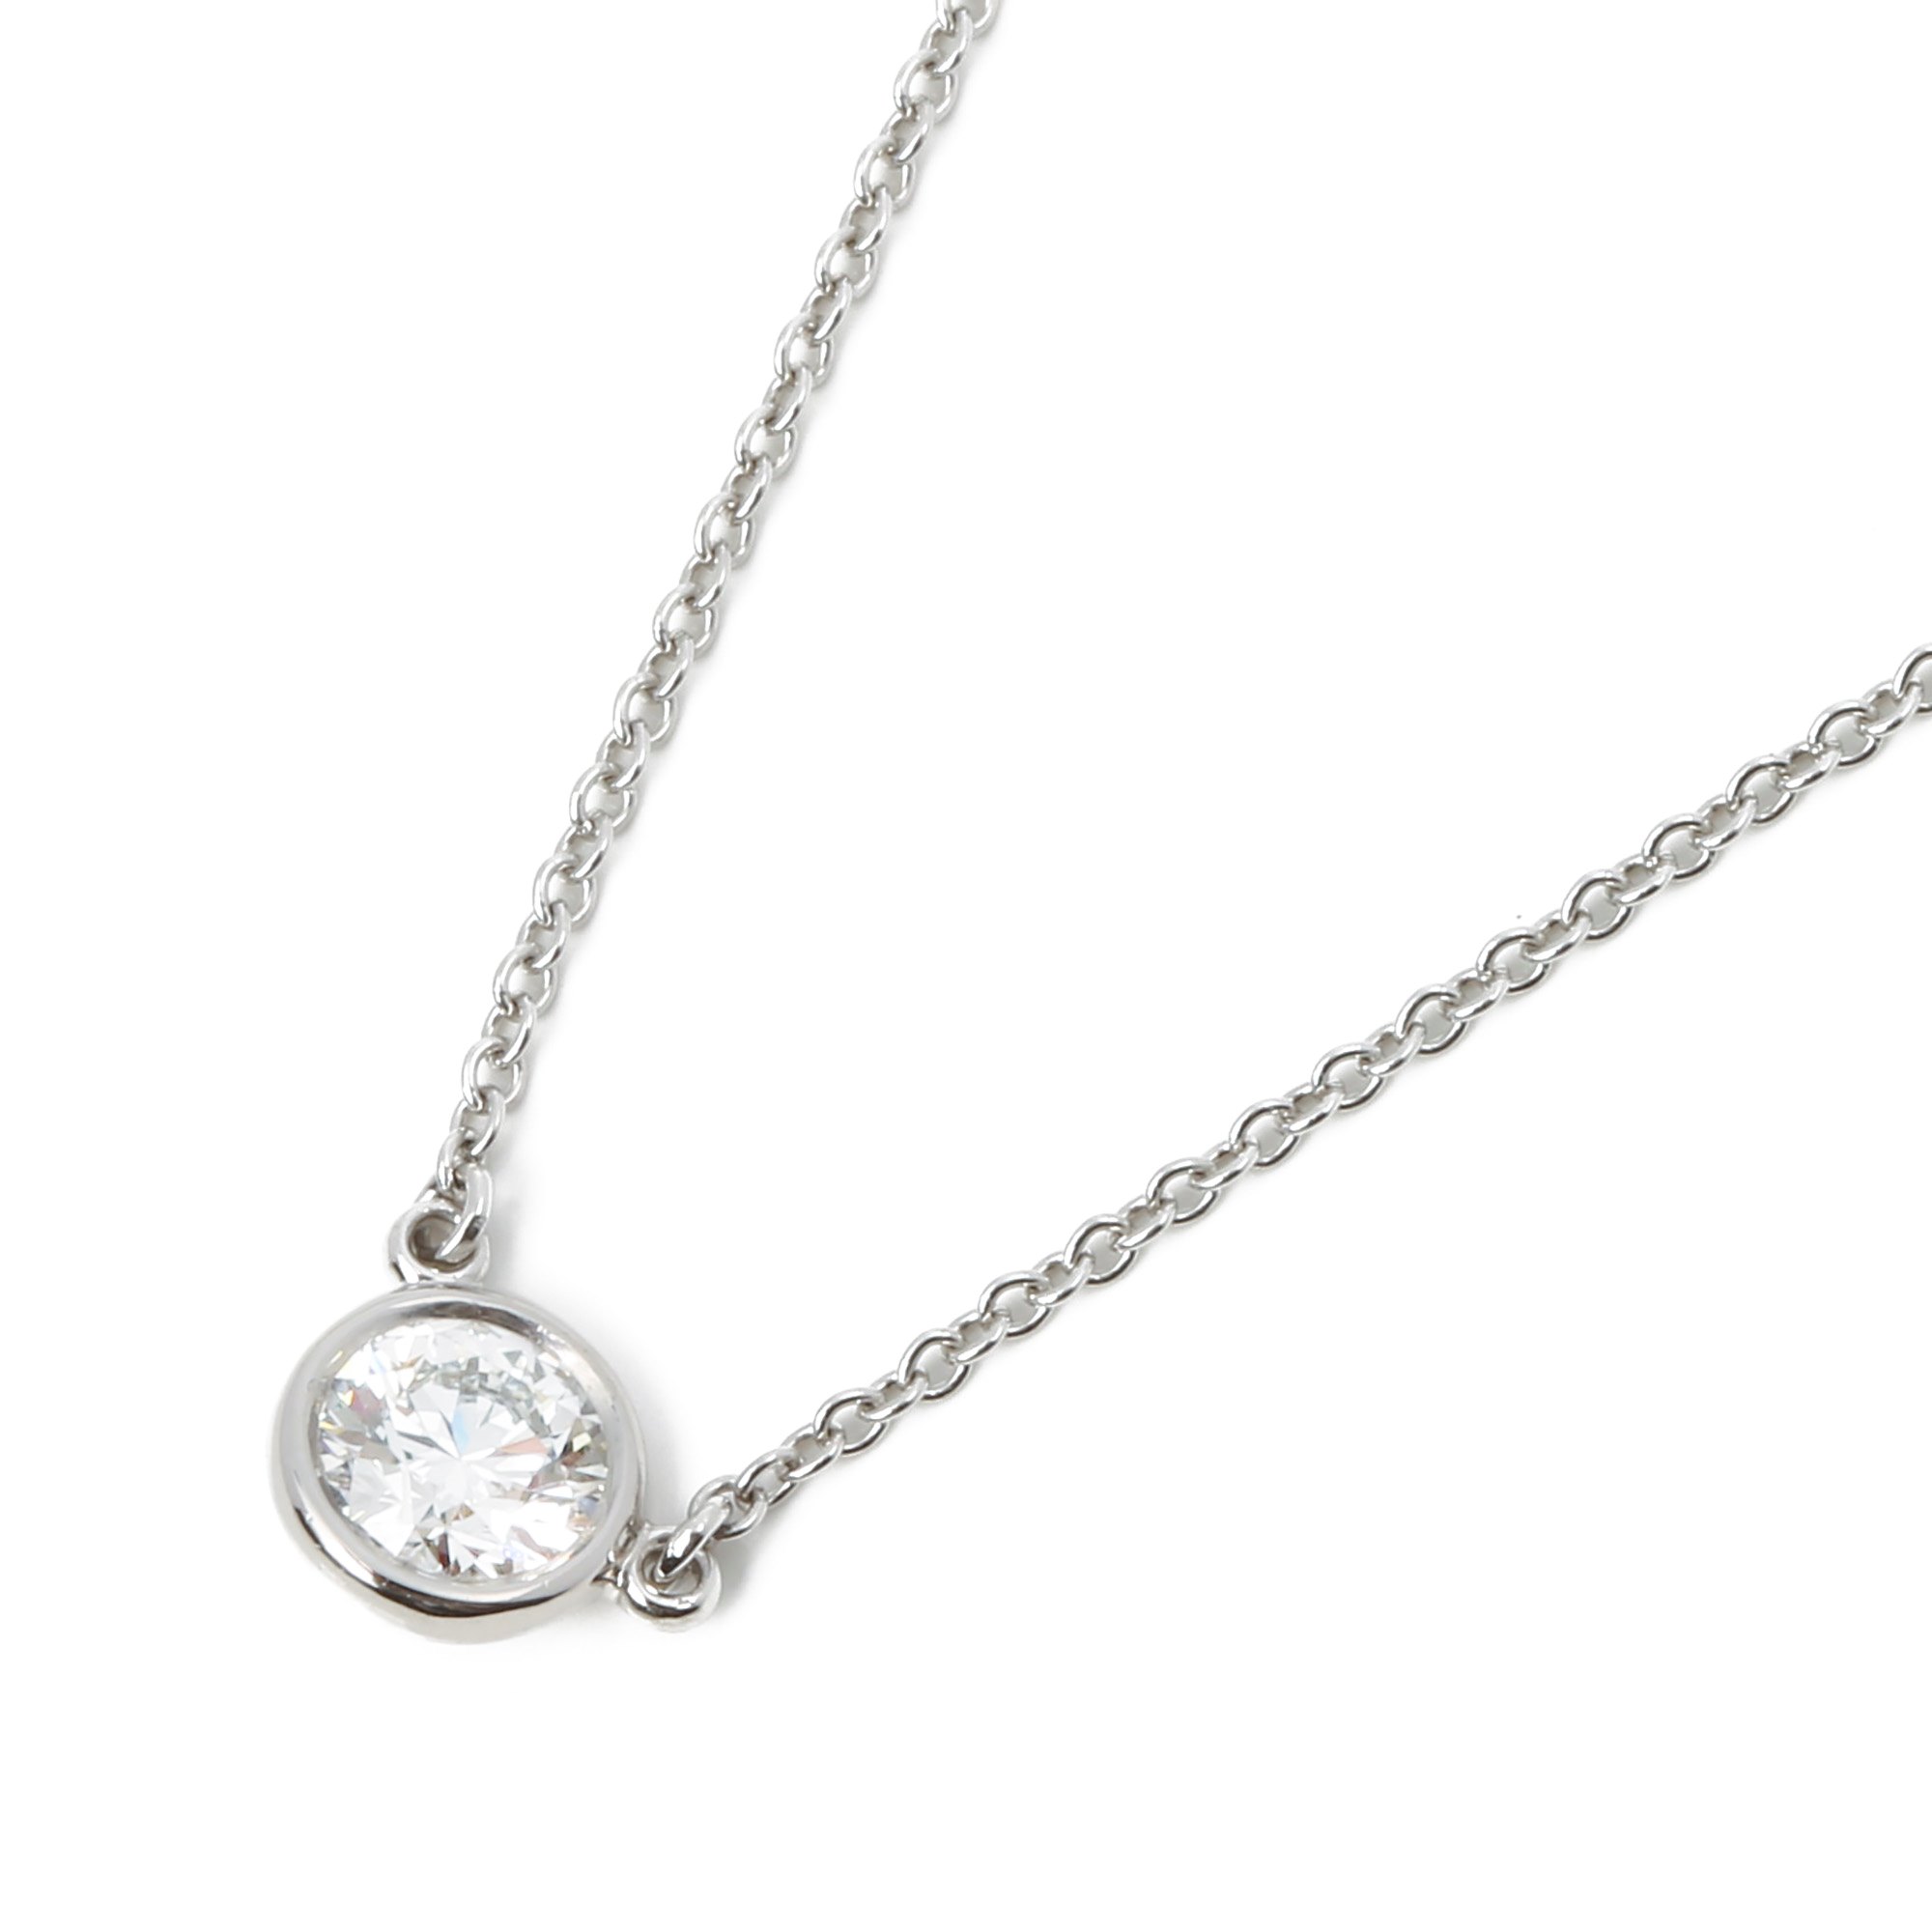 Tiffany & Co. Diamonds by the Yard 0.35ct Pendant Necklace